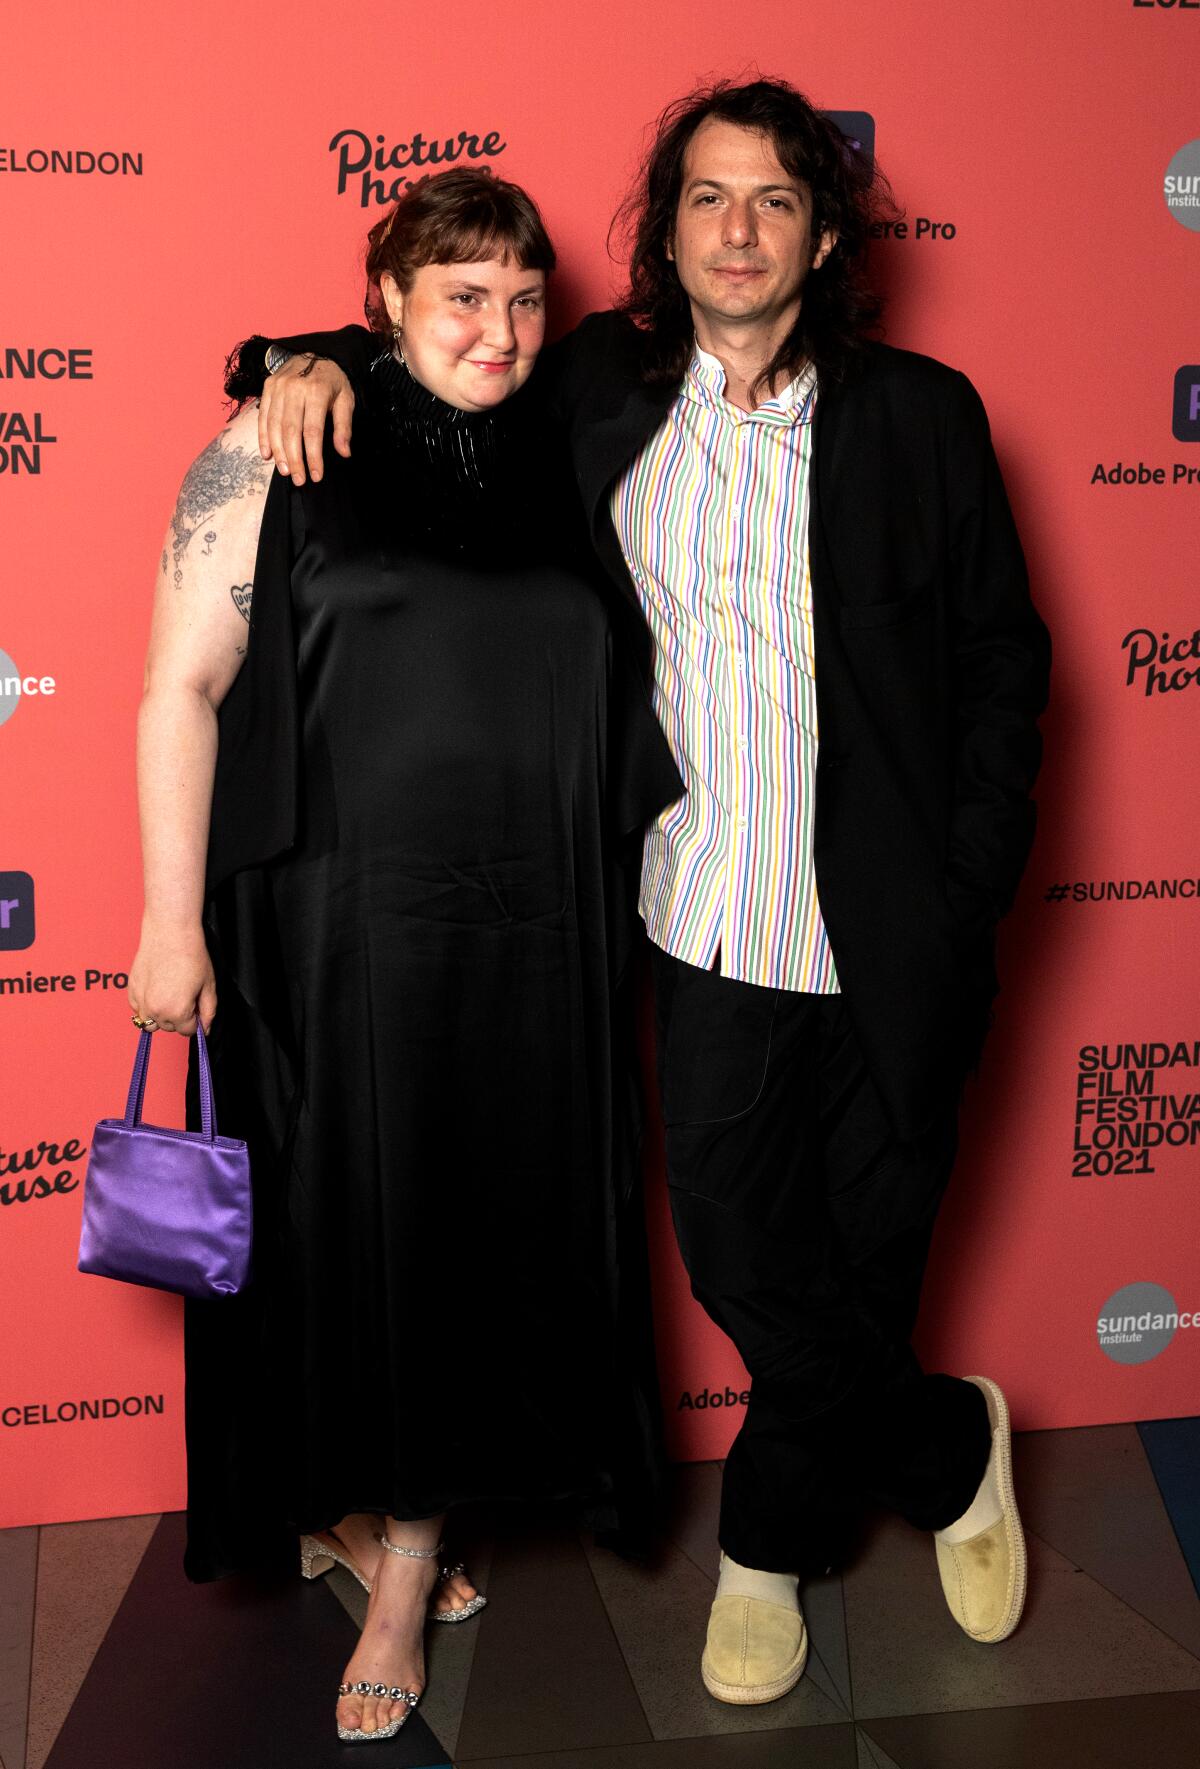 A man stands with his arm around a woman on a red carpet